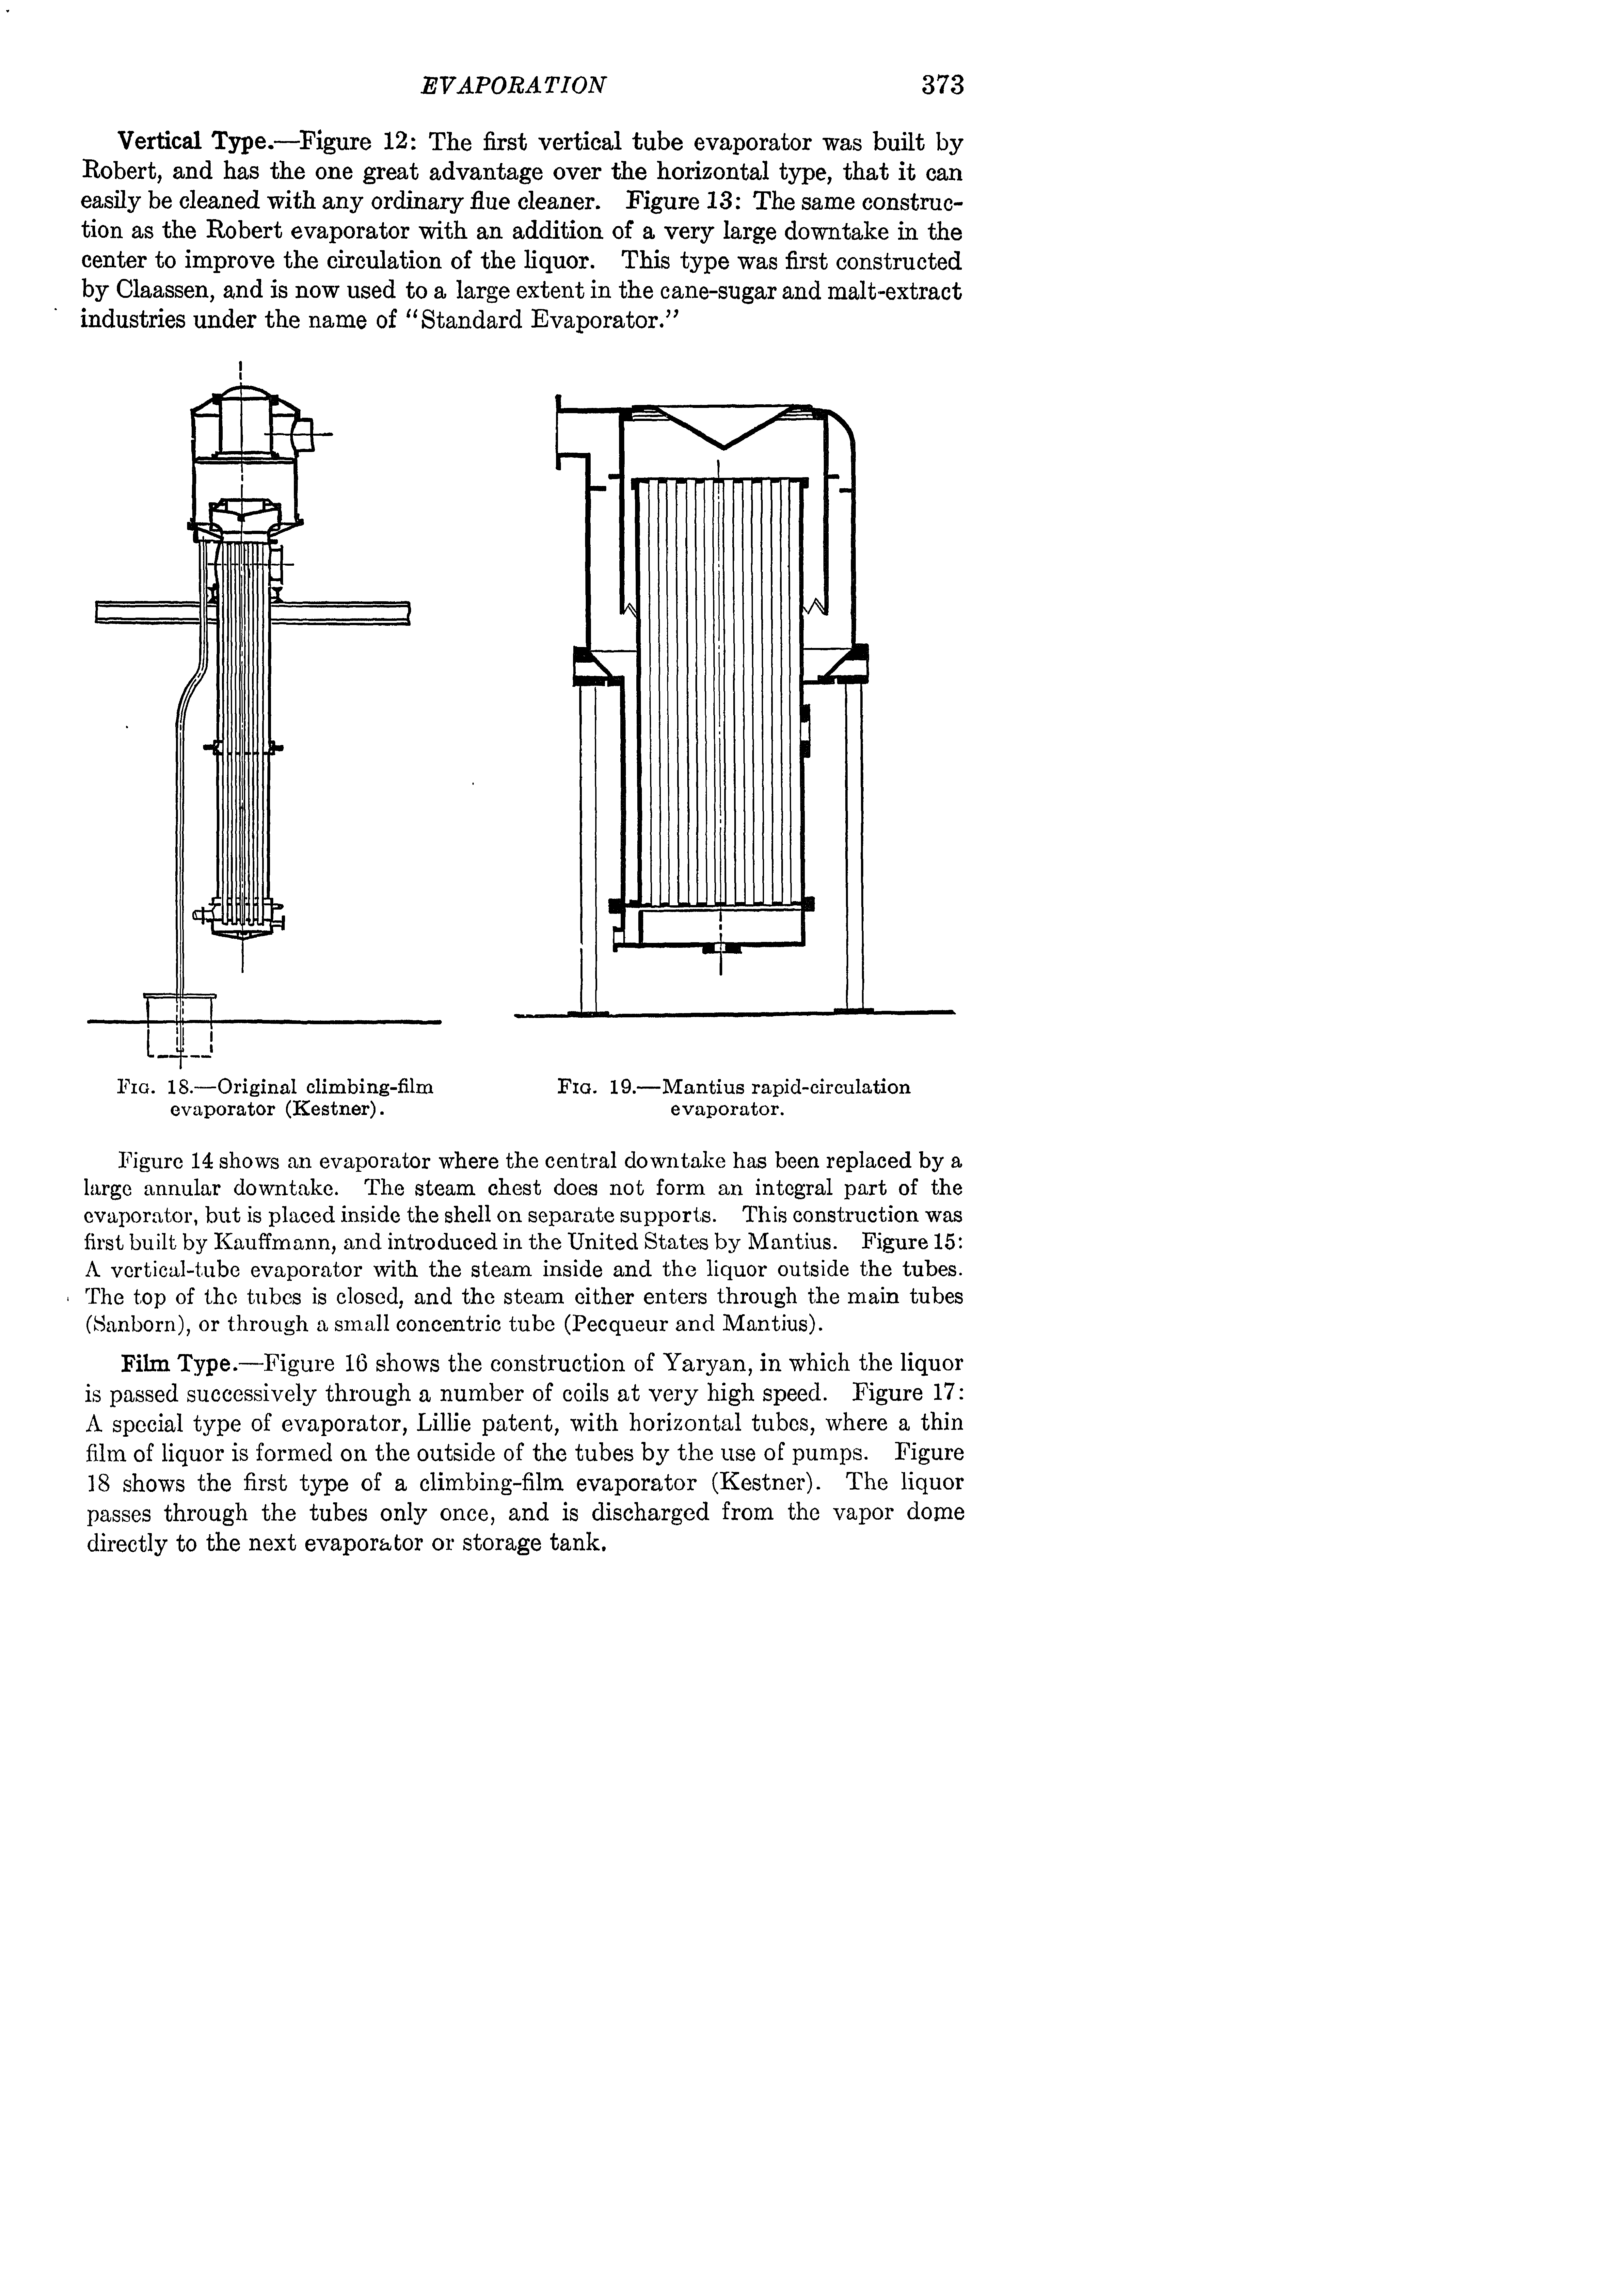 Figure 14 shows an evaporator where the central downtake has been replaced by a large annular downtake. The steam chest does not form an integral part of the evaporator, but is placed inside the shell on separate supports. This construction was first built by Kauffmann, and introduced in the United States by Mantius. Figure 15 A vertical-tube evaporator with the steam inside and the liquor outside the tubes. The top of the tubes is closed, and the steam either enters through the main tubes (Sanborn), or through a small concentric tube (Pecqueur and Mantius).